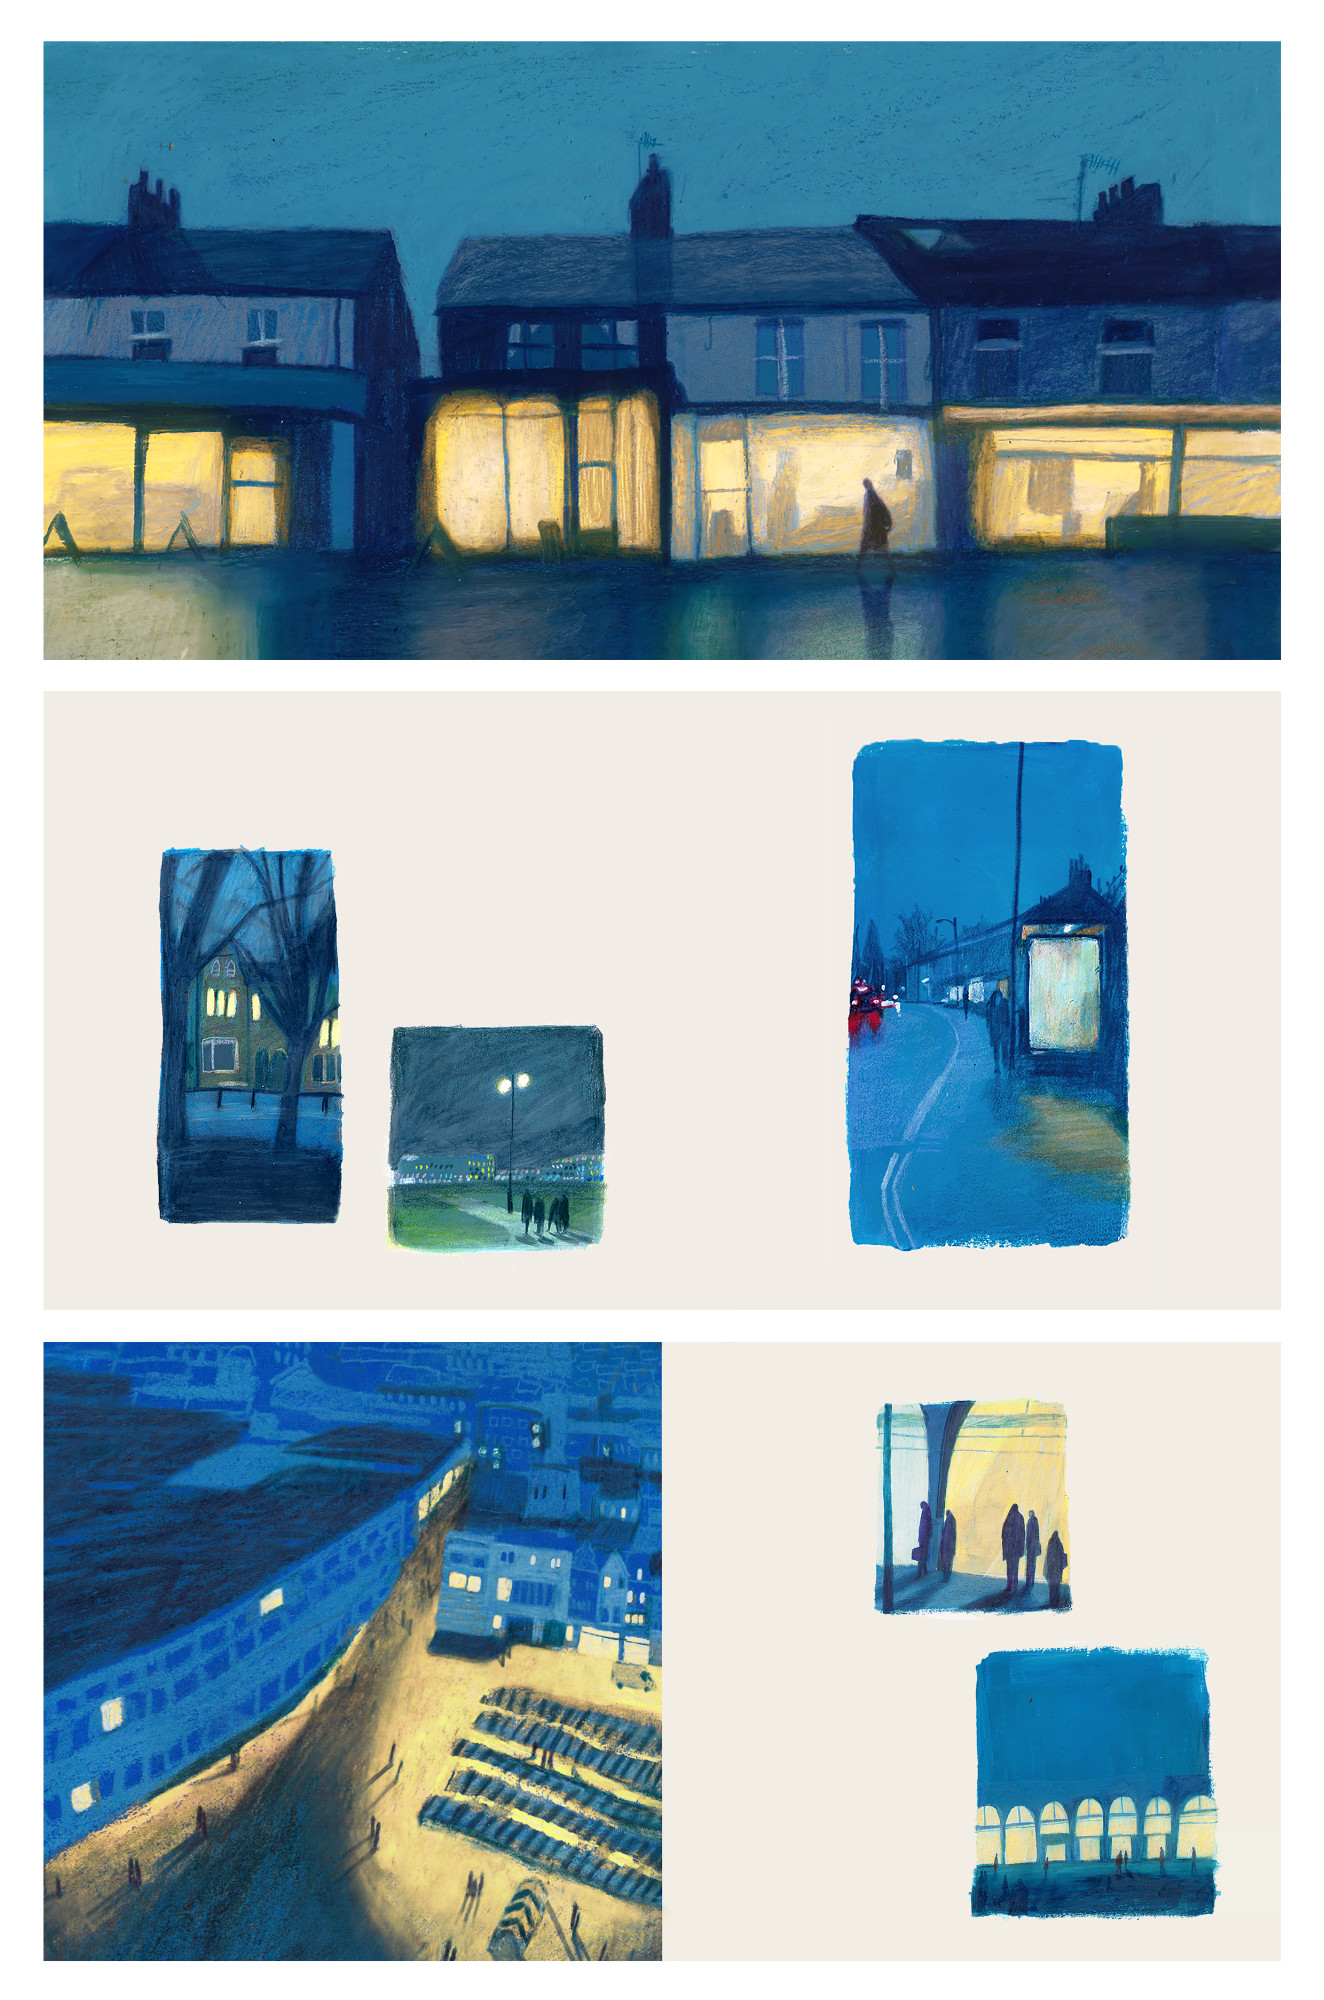 Three selected layouts from the book ‘Habitats’, which explores figures and light sources at night. This work was selected for the AOI World Illustration Awards long-list. The whole book can be found on Jodie’s website. Jodie Howard.